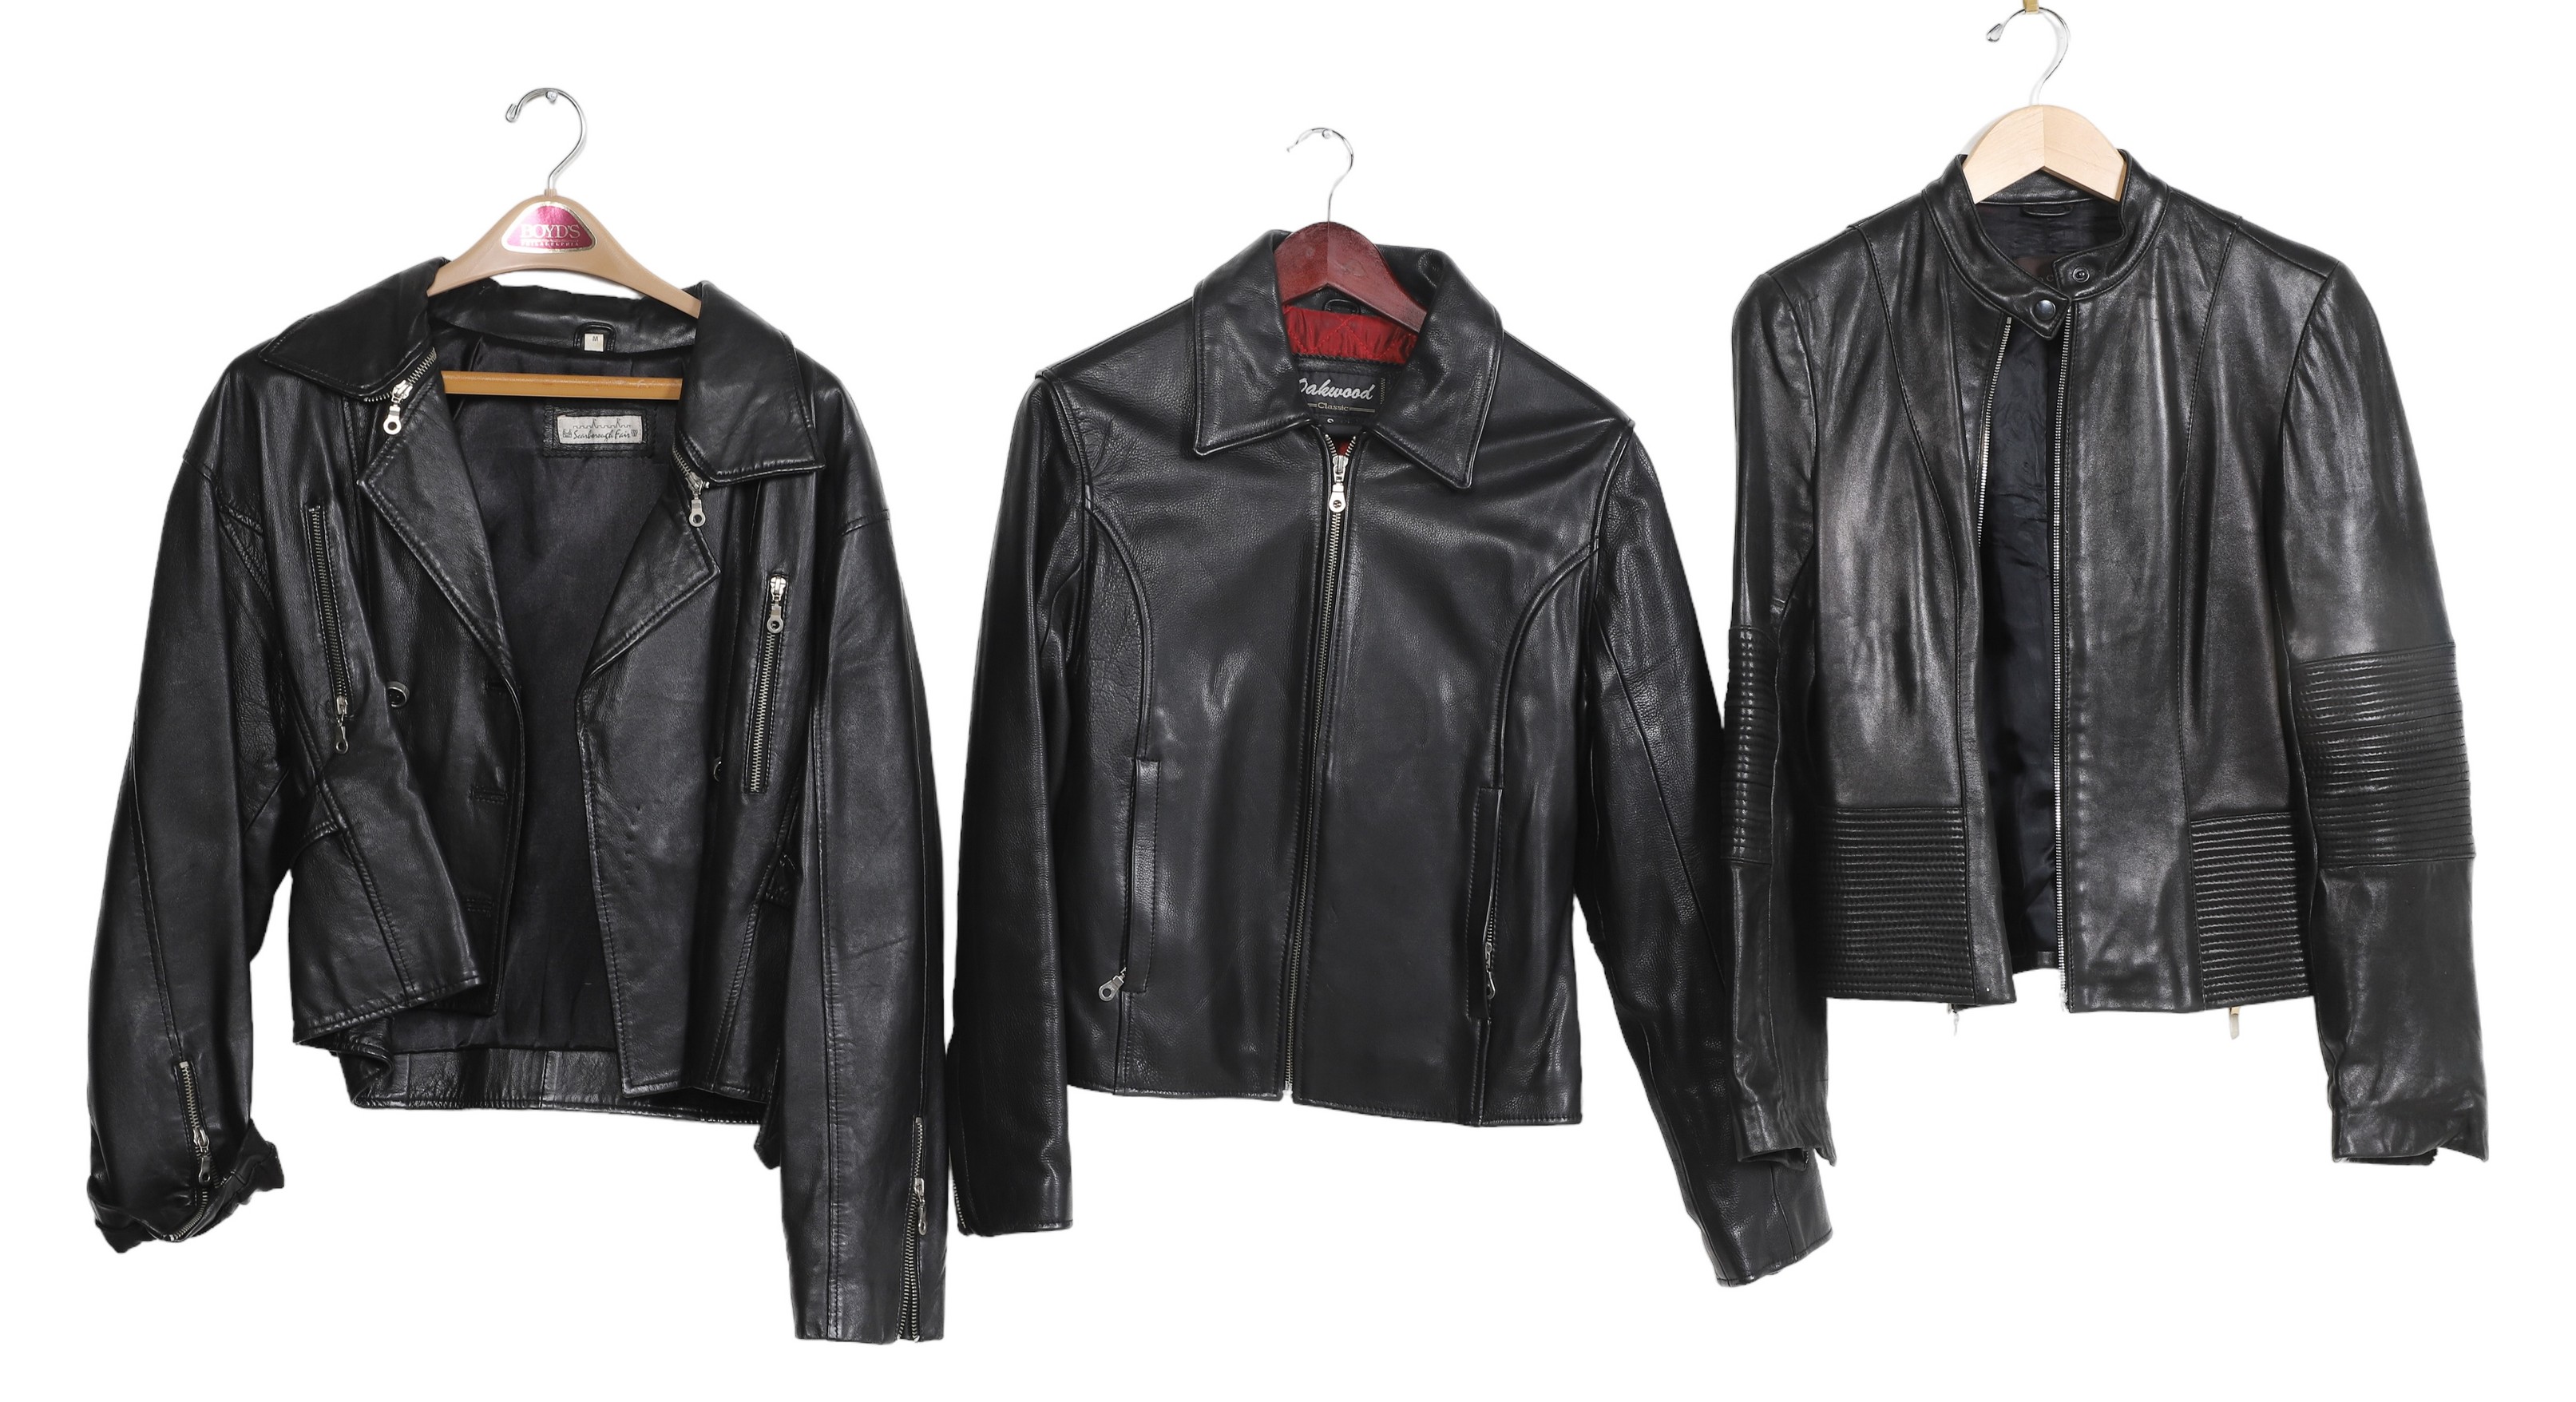  3 Ladies leather jackets to include 2e1496